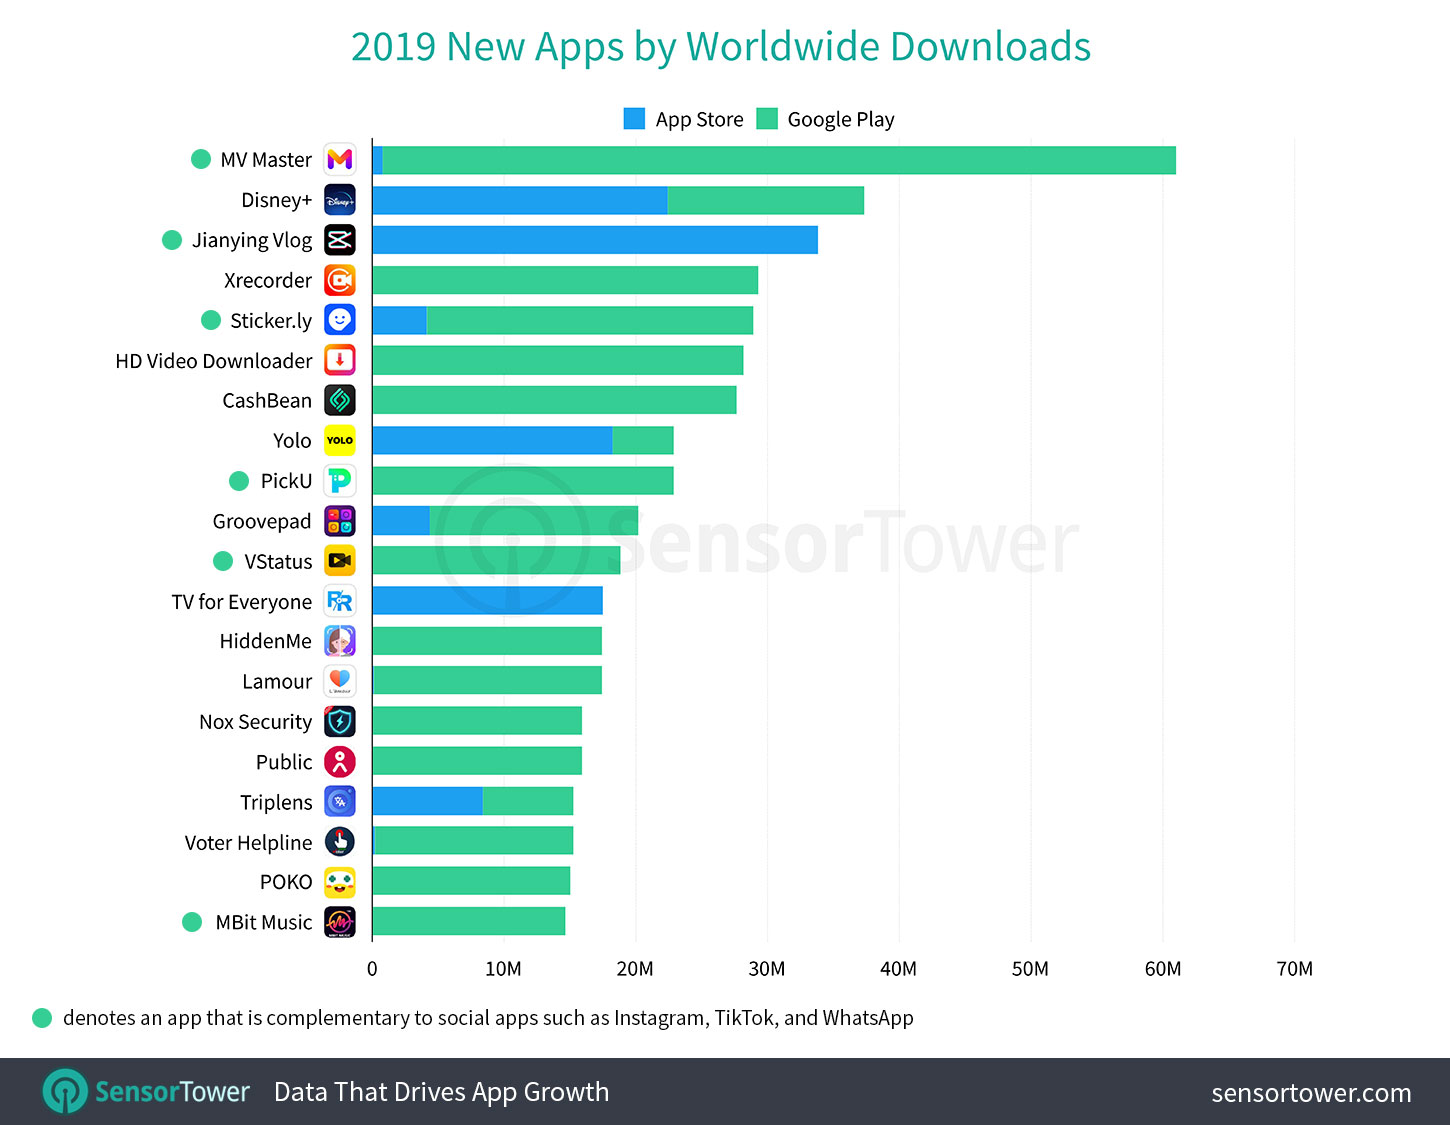 2019’s New Apps by Worldwide Downloads